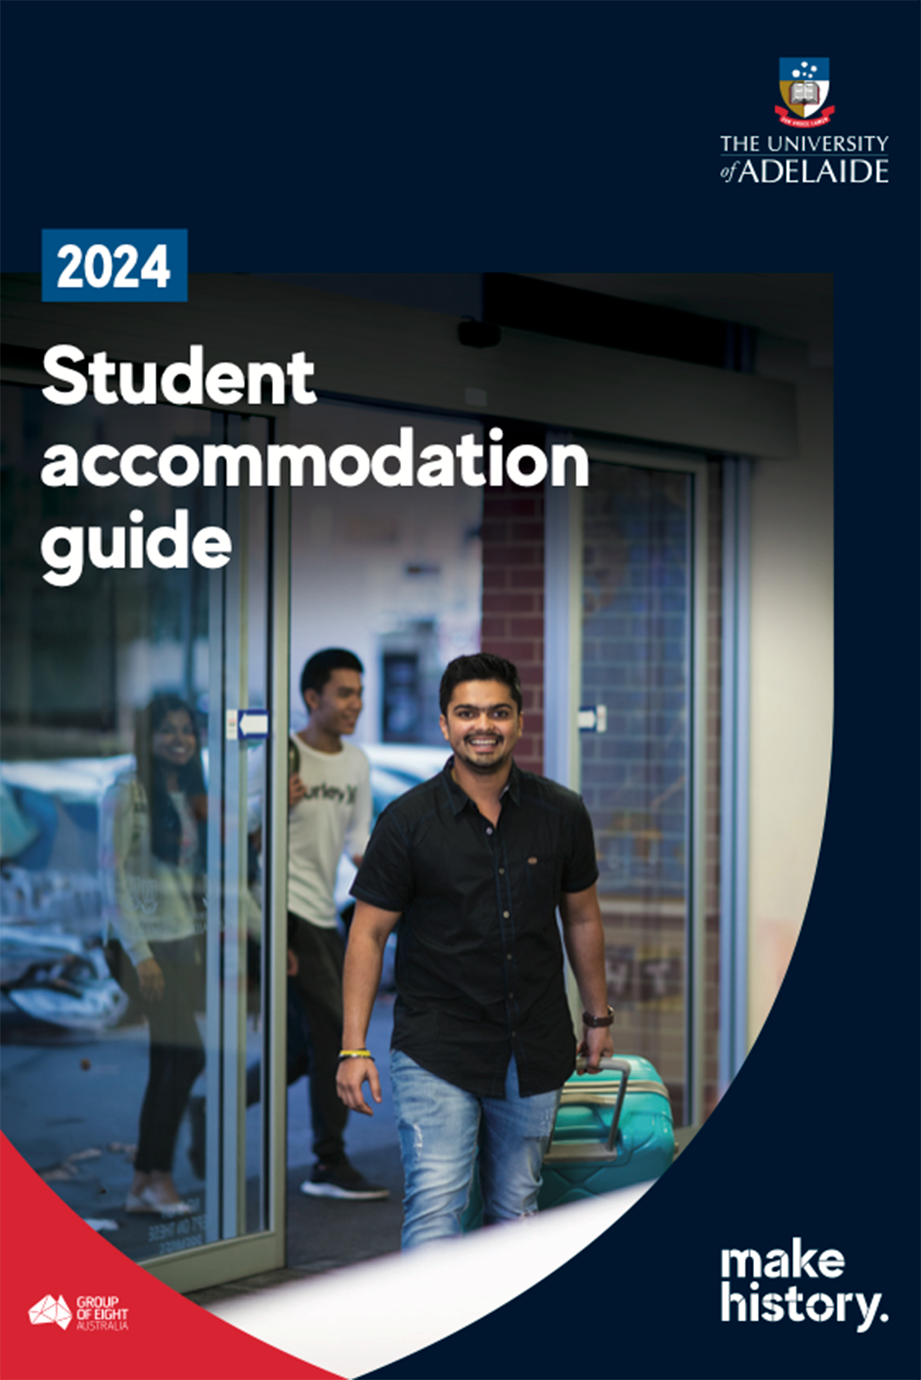 Student accommodation guide